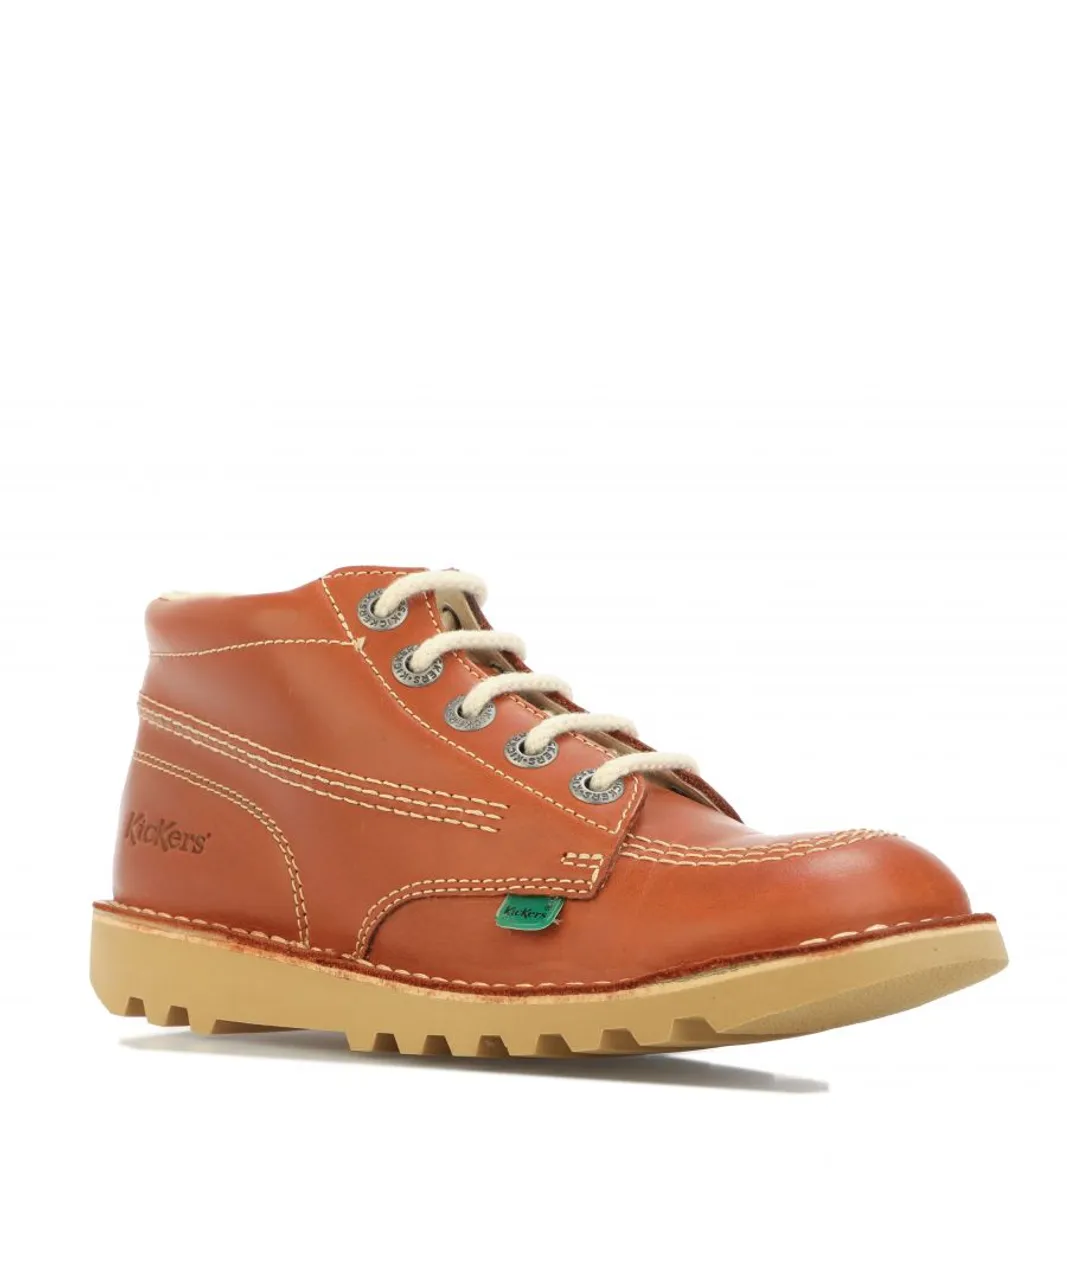 Kickers Boys Boy's Junior Kick Hi Core Leather Boots in Tan Leather (archived)